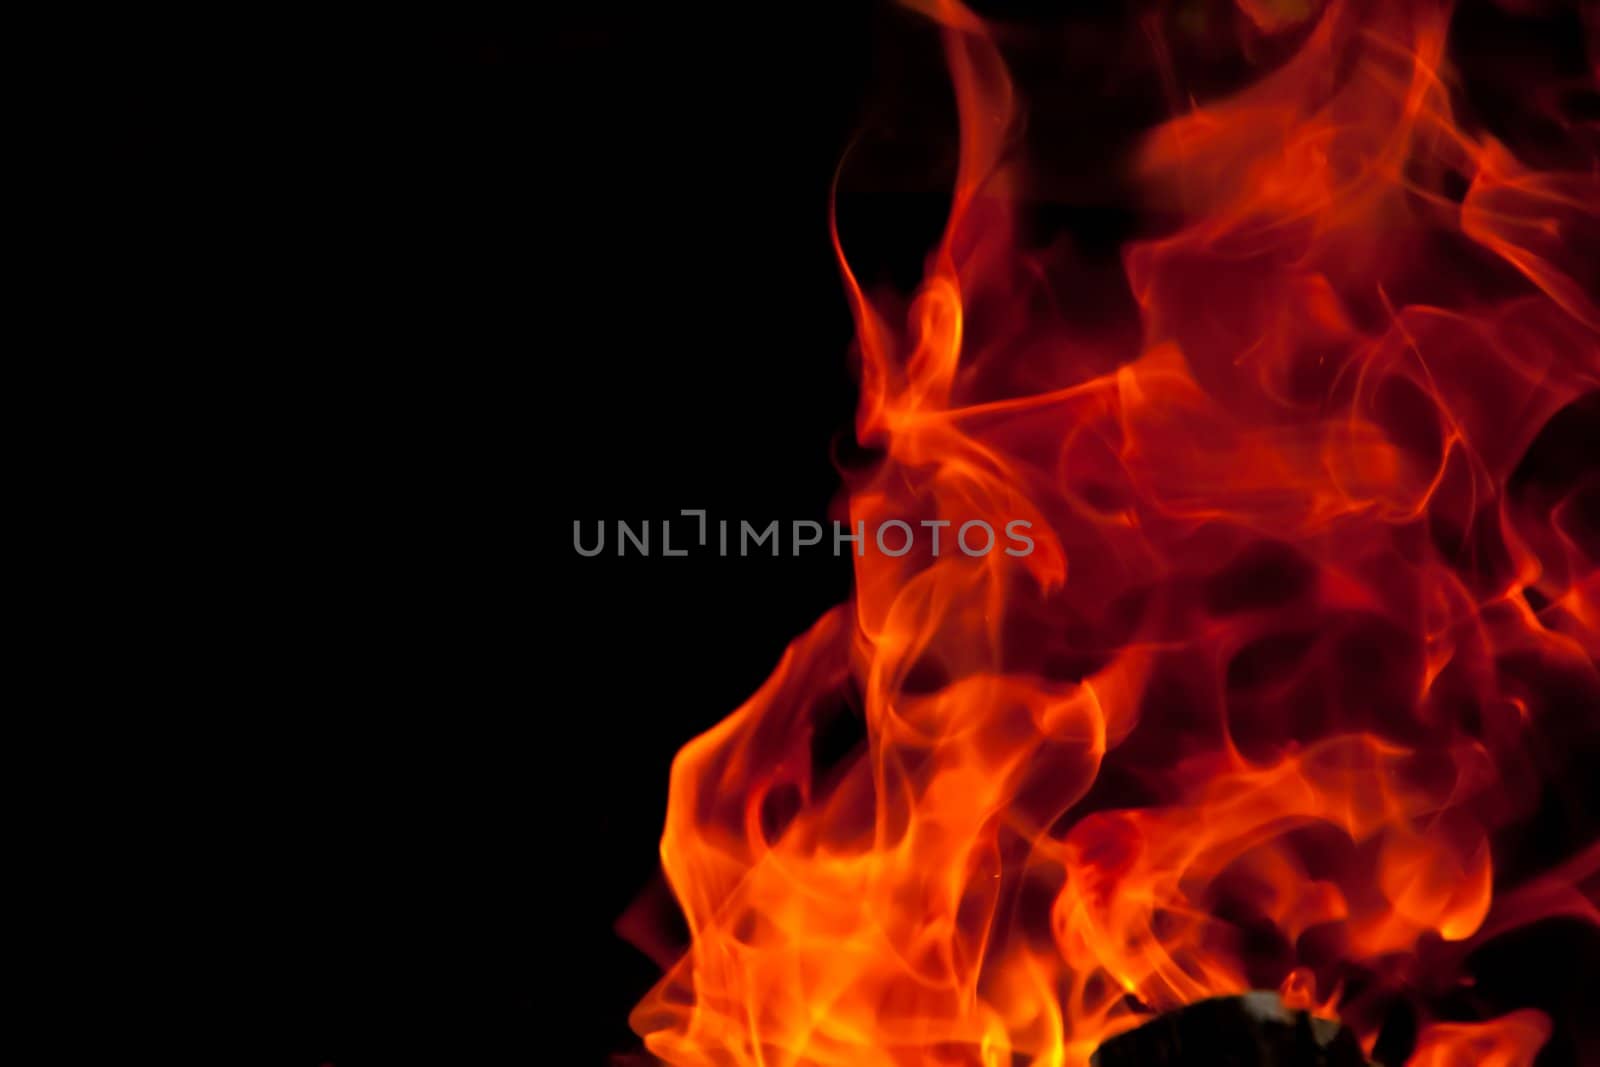 Flames against a black background